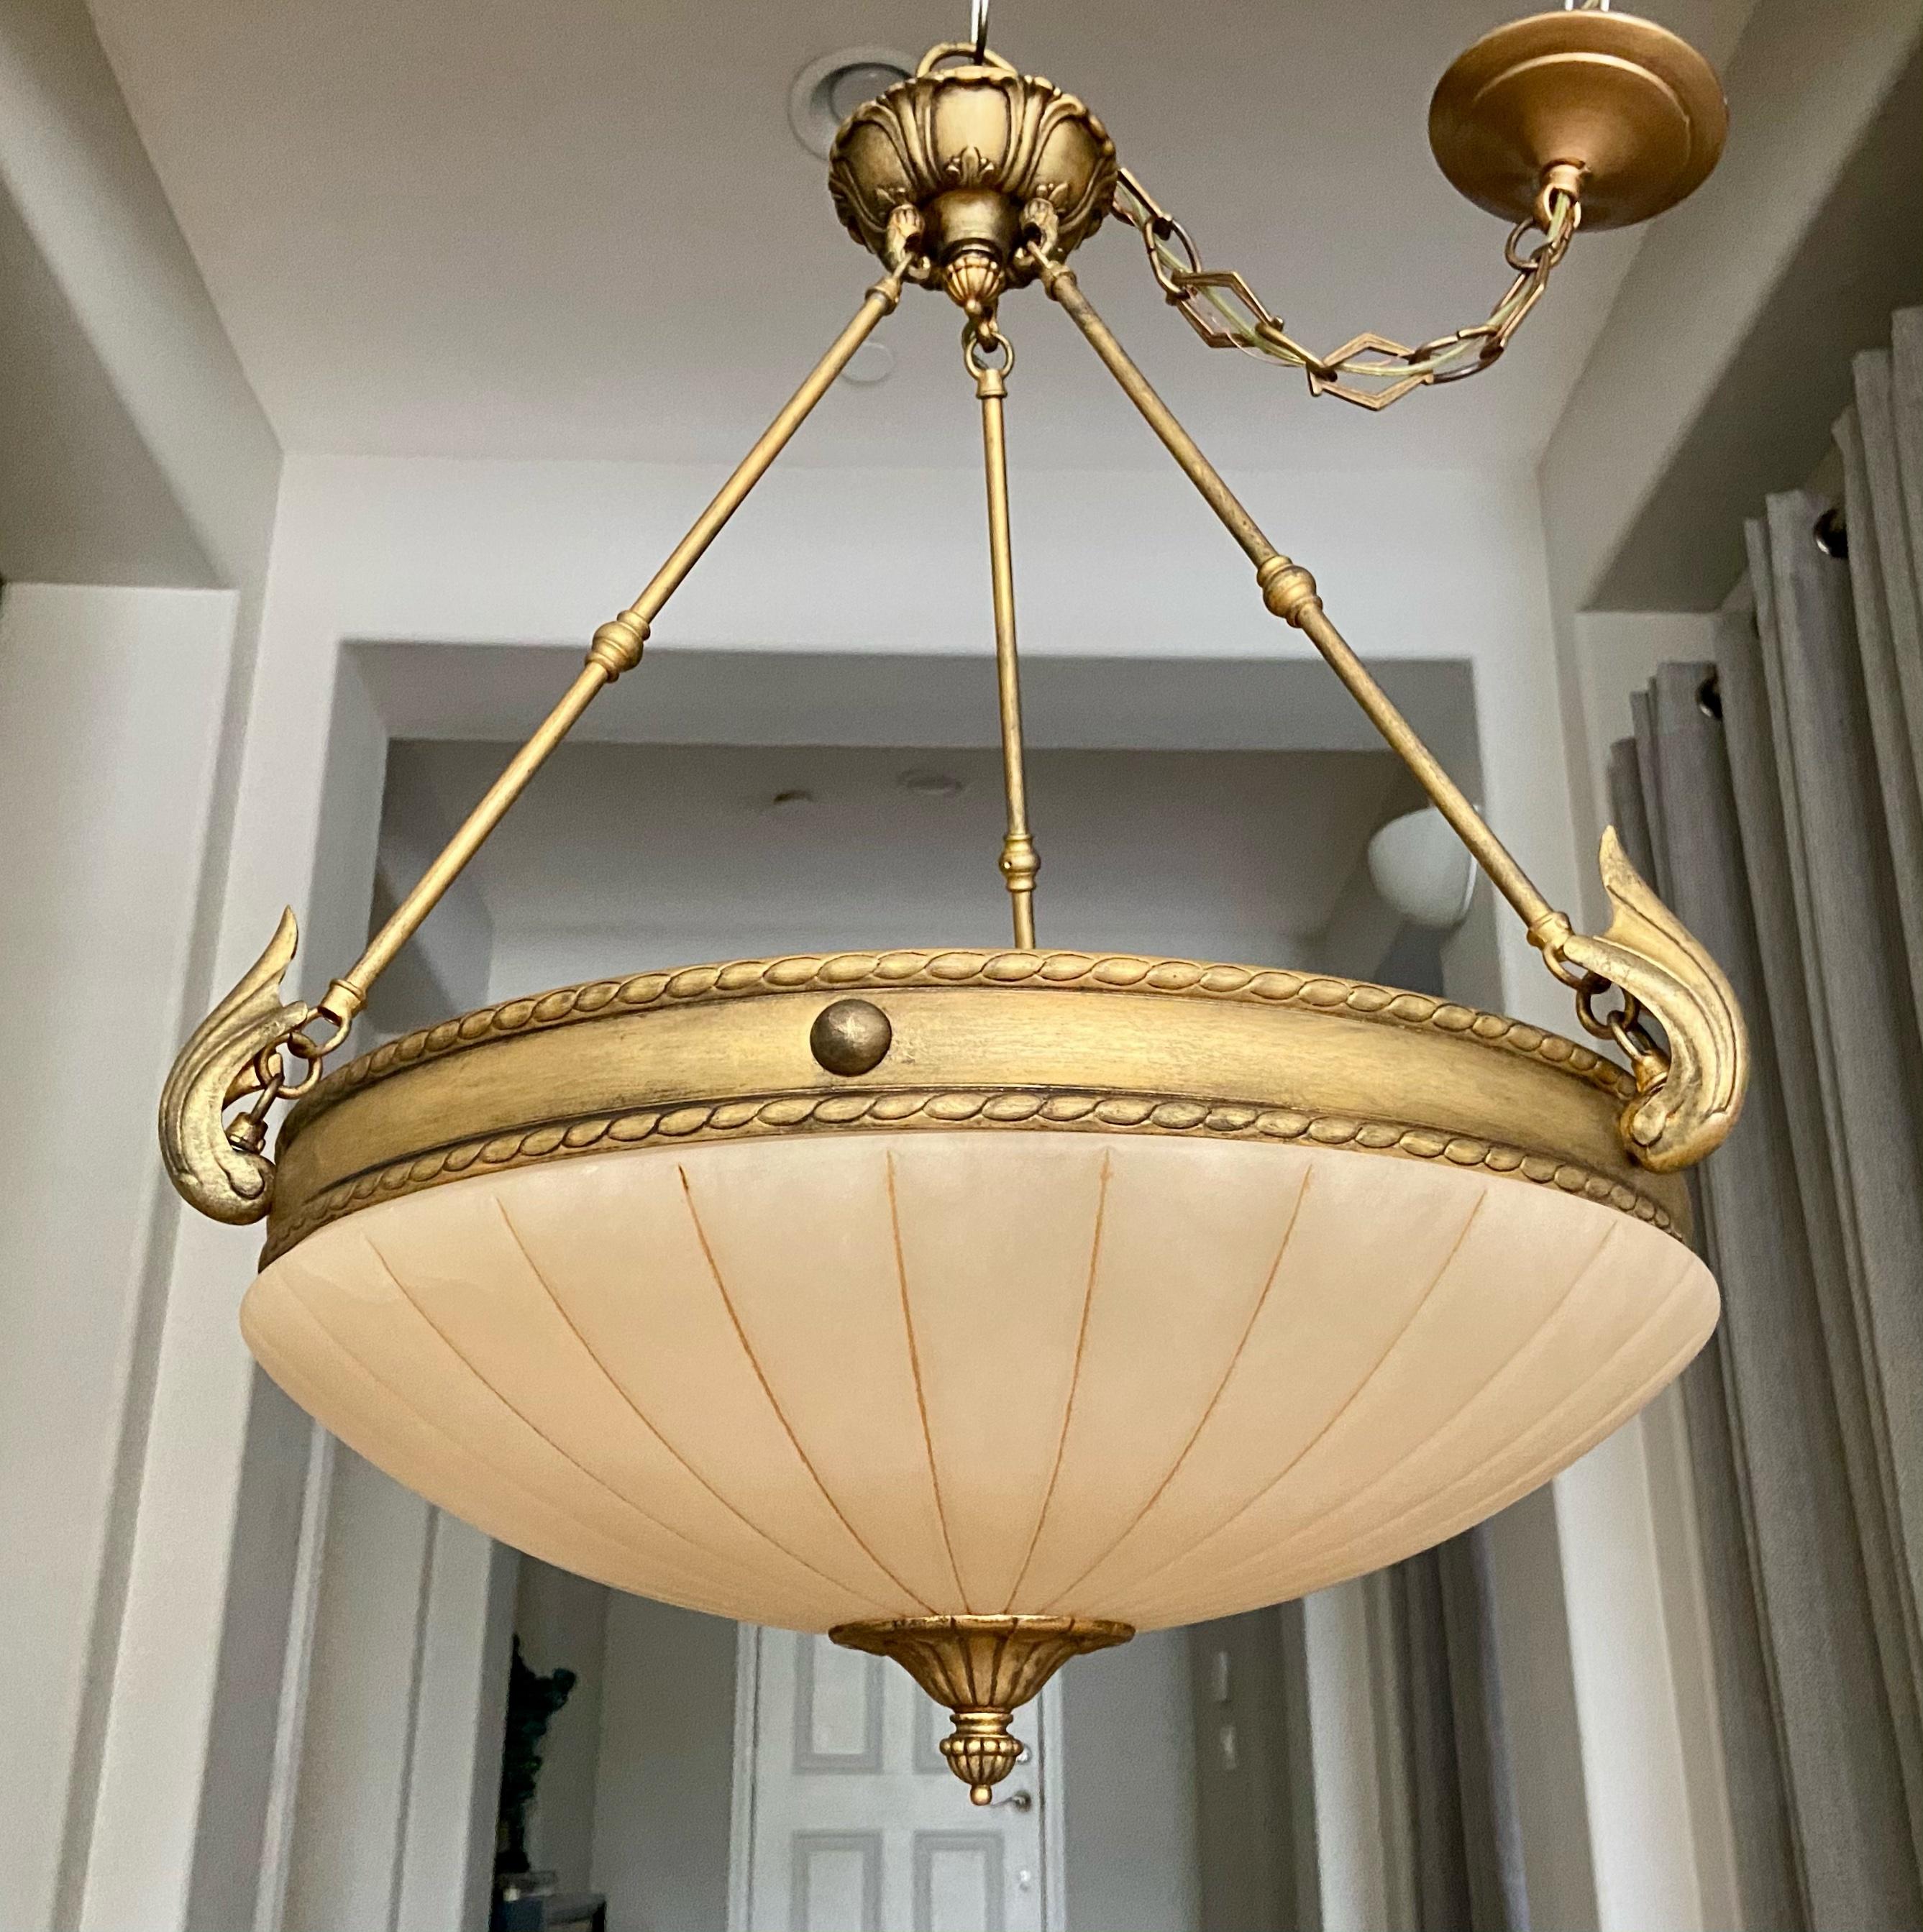 Larger scale carved alabaster chandelier with 3-light and antiqued gold finish hardware fittings. Fixture uses three regular size bulbs size bulbs.
Measures: Overall diameter is 21